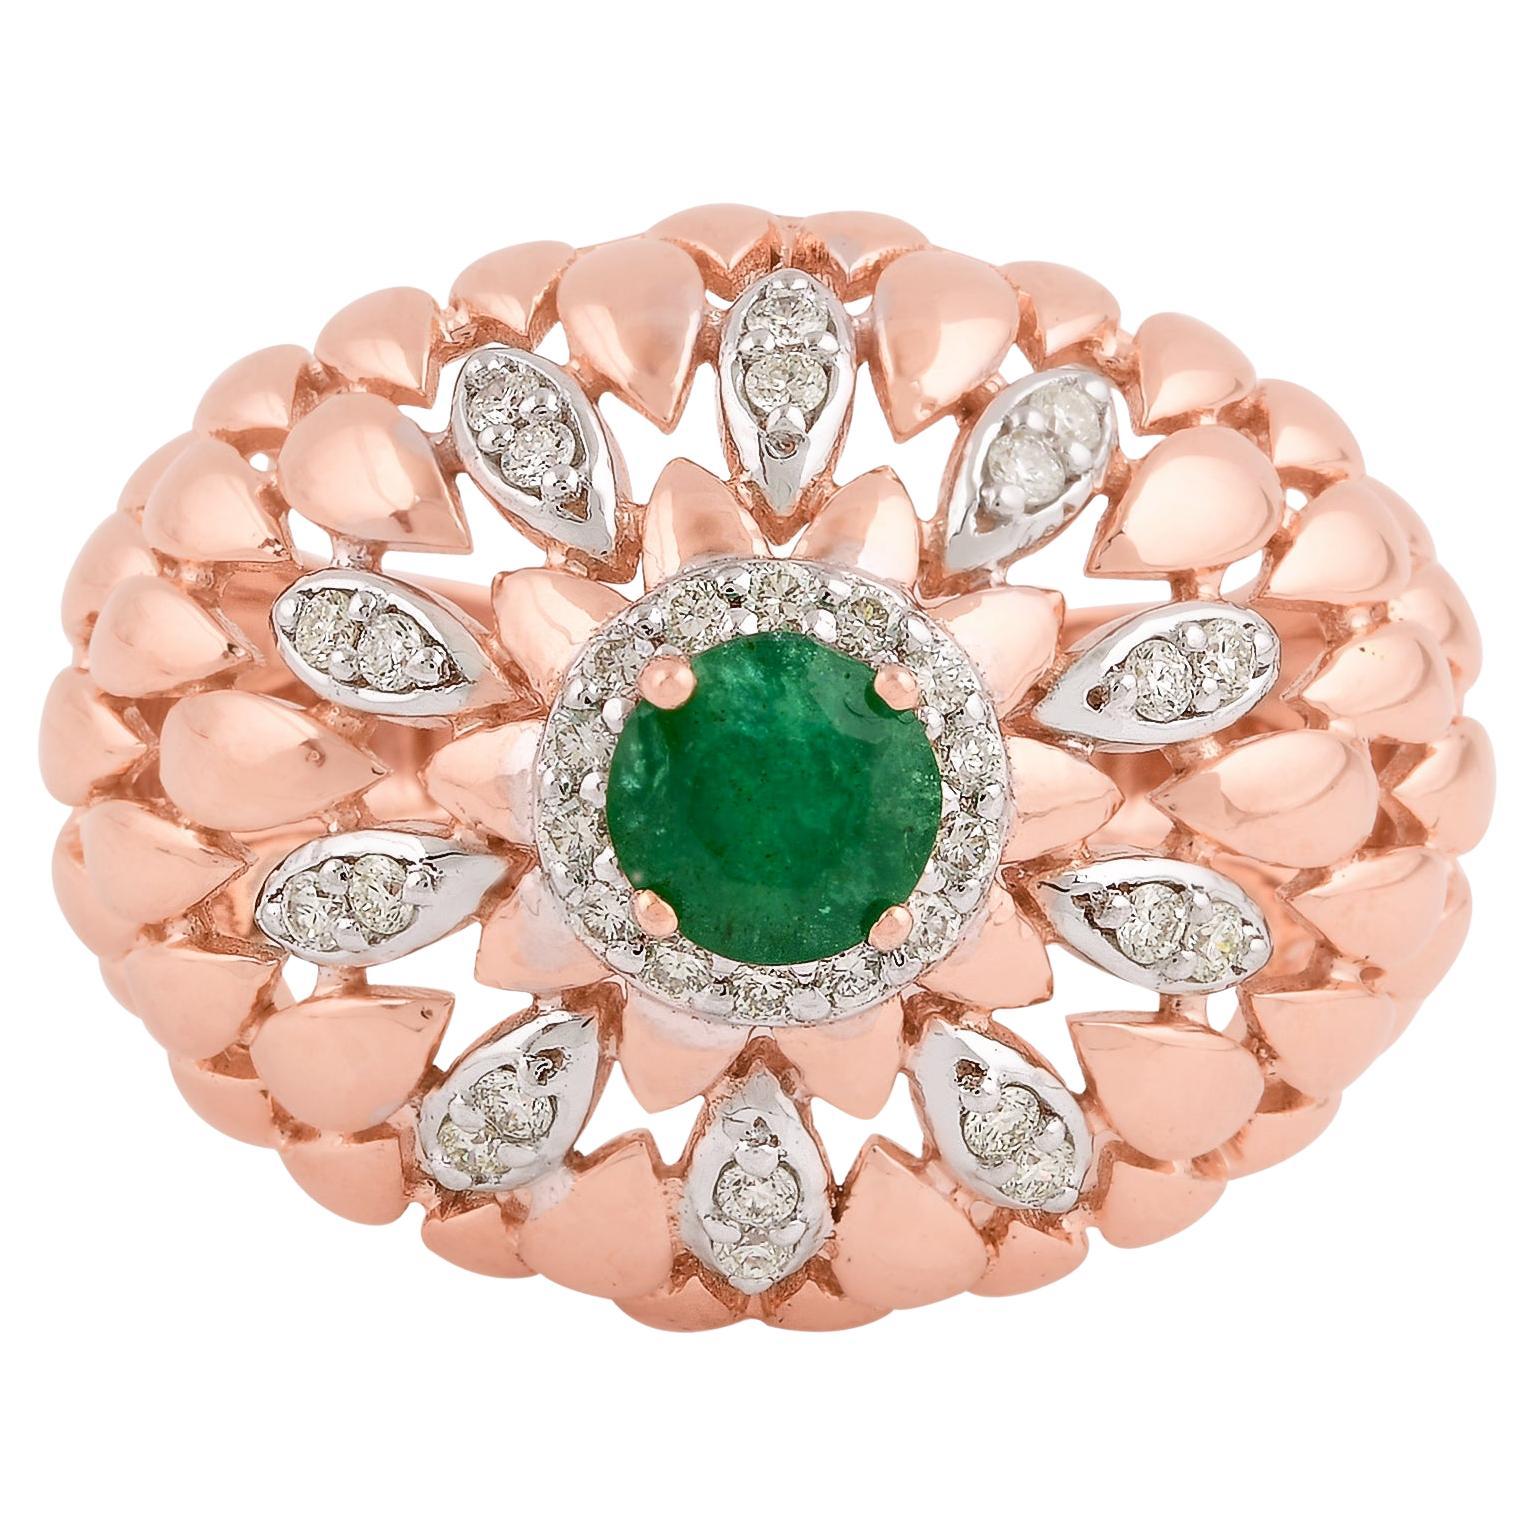 Natural Emerald Gemstone Dome Ring Diamond Pave Solid 18k Rose Gold Fine Jewelry